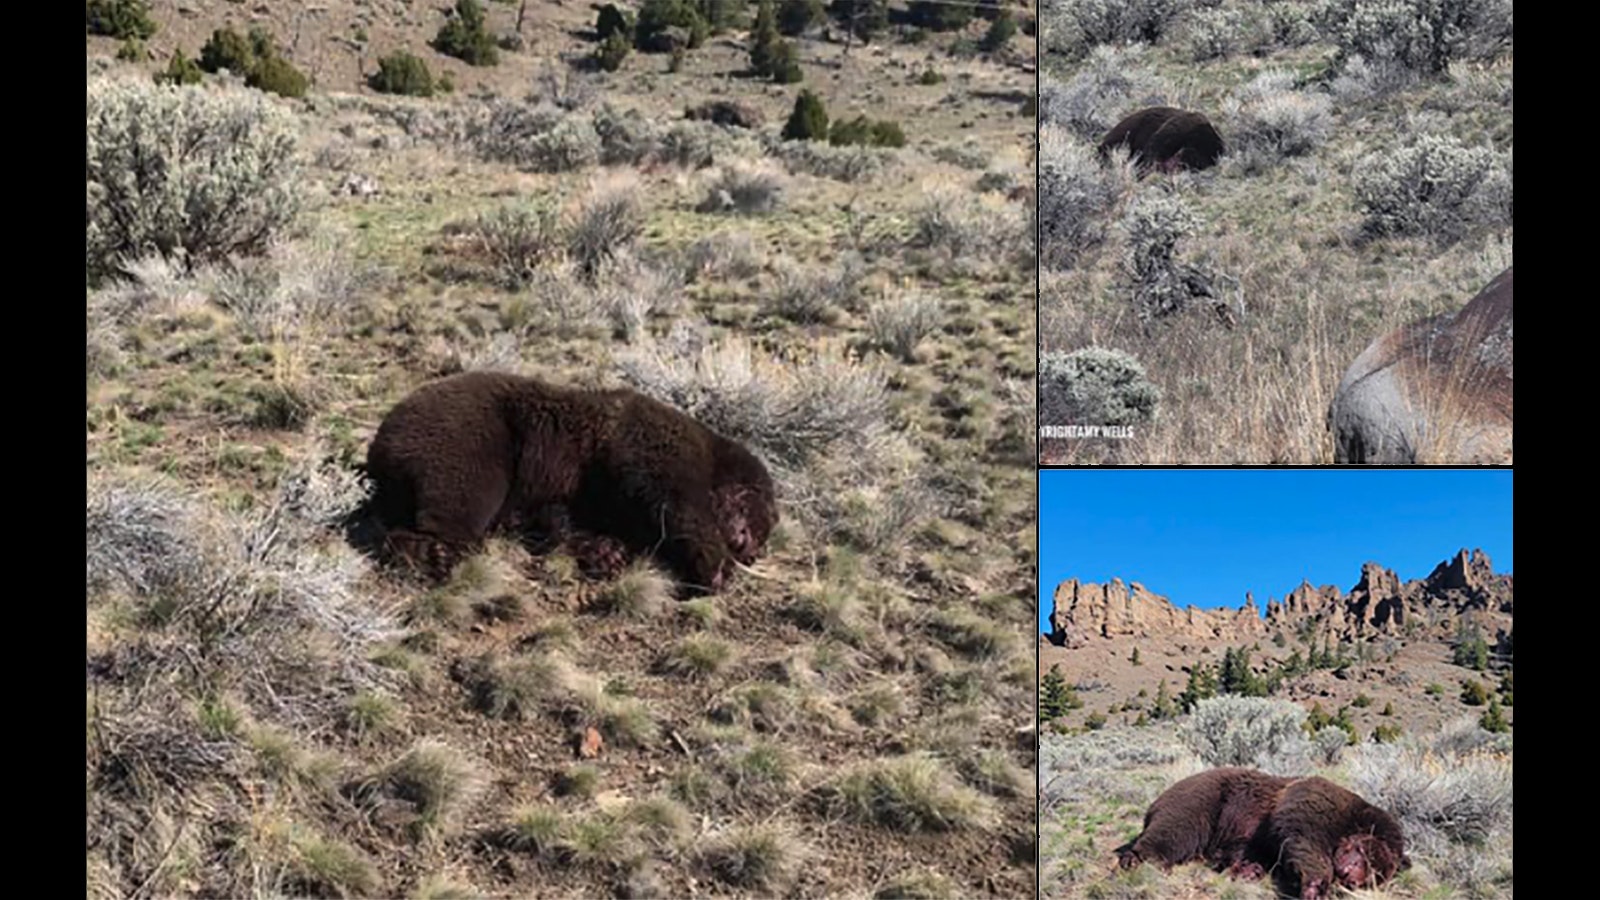 Facebook posts, such as this one on the Wild Love Images wildlife photography Facebook page, show photos of a grizzly bear that was reported to have been shot and left dead Monday on the North Fork Highway between Cody and Yellowstone Park.